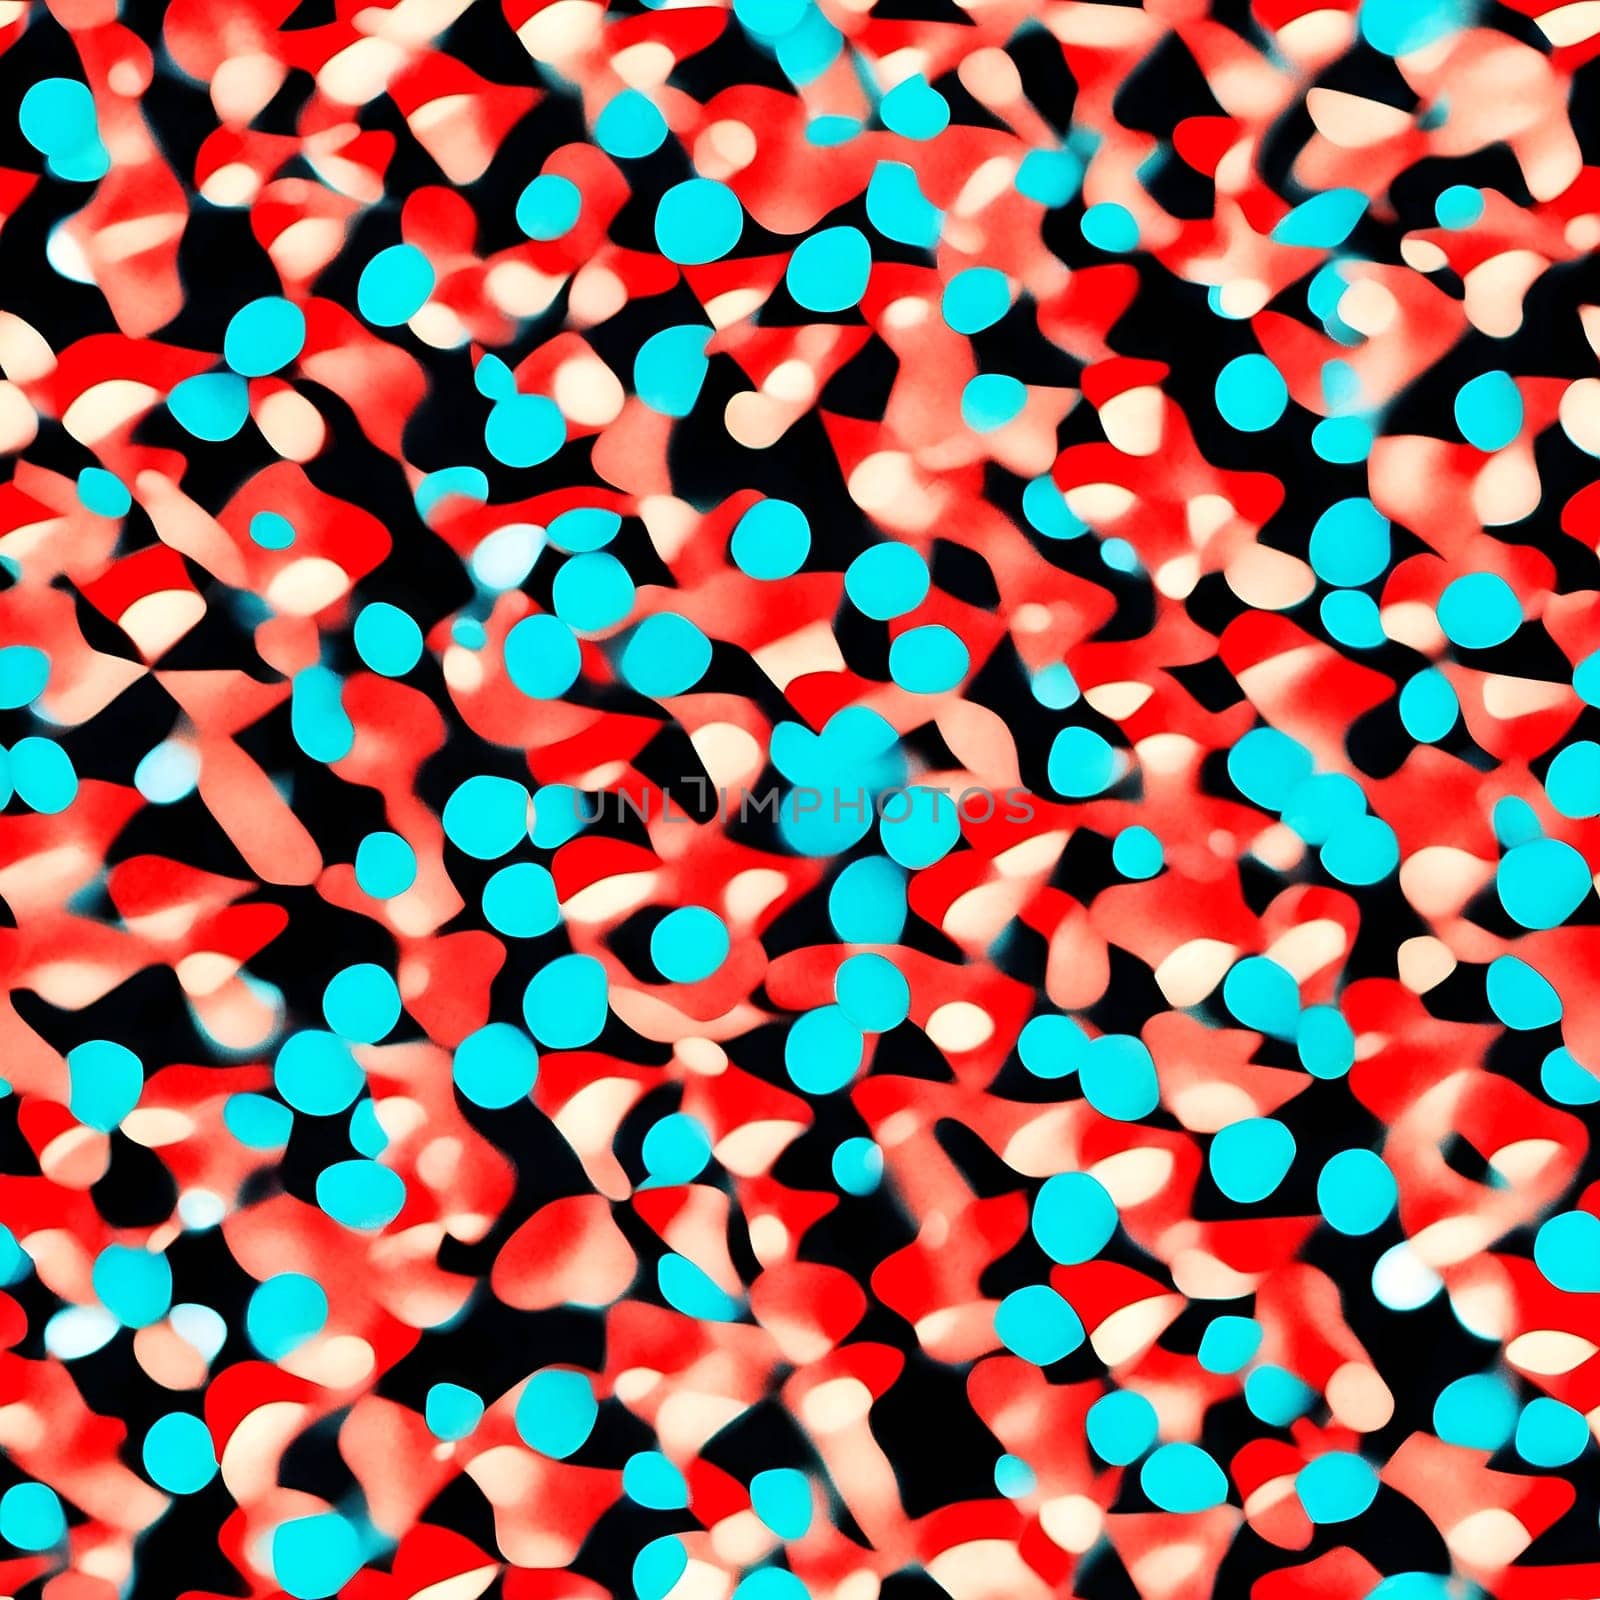 A seamless pattern featuring a vast quantity of blue and red dots against a black background.